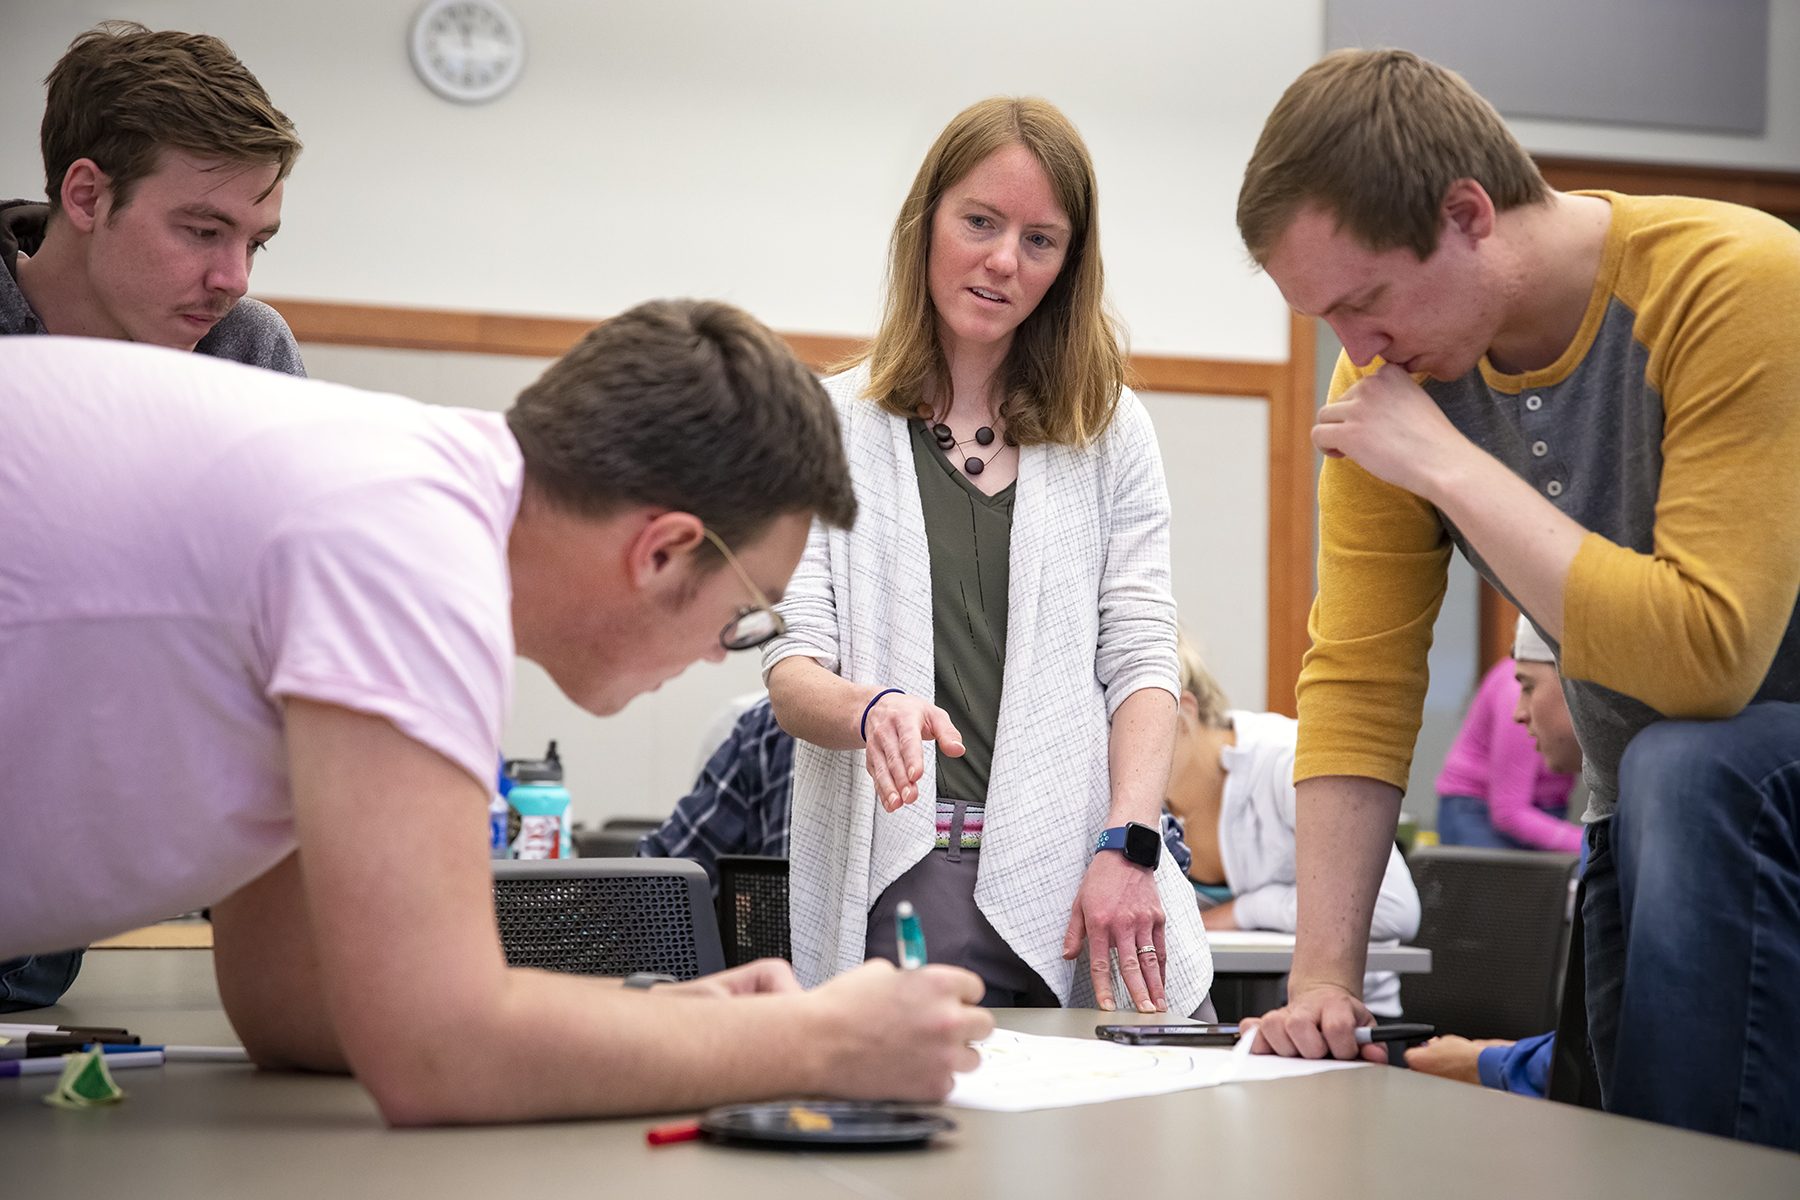 students collaborate in a classroom with guidance from the professor